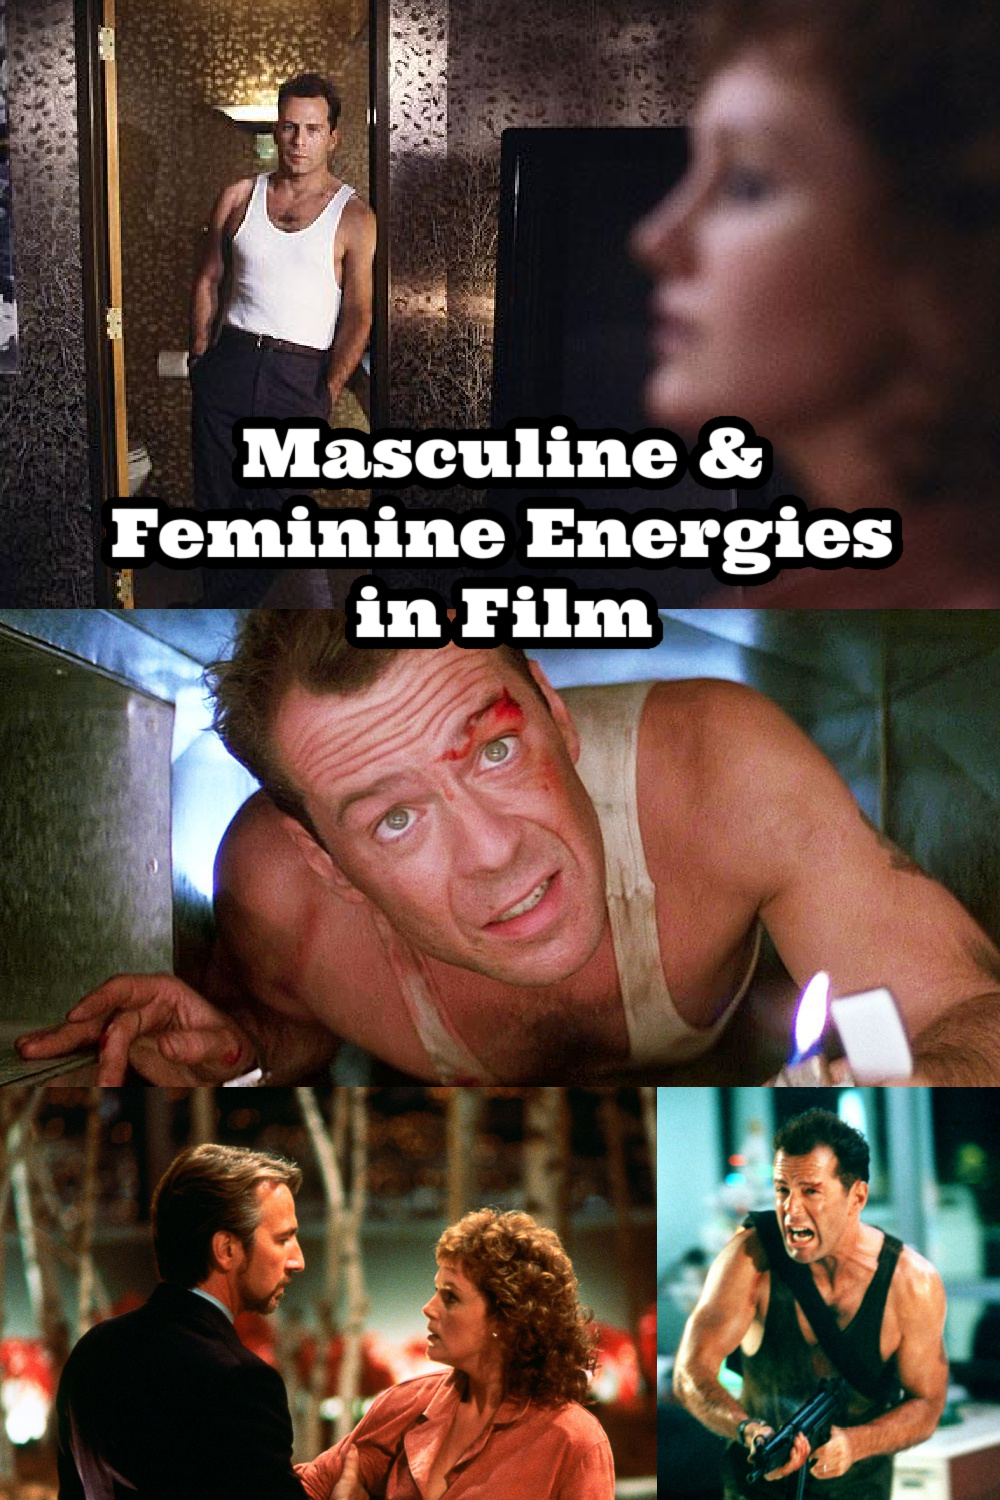 Die Hard Masculinity & Grounded Masculine Energy | Die Hard Reaction